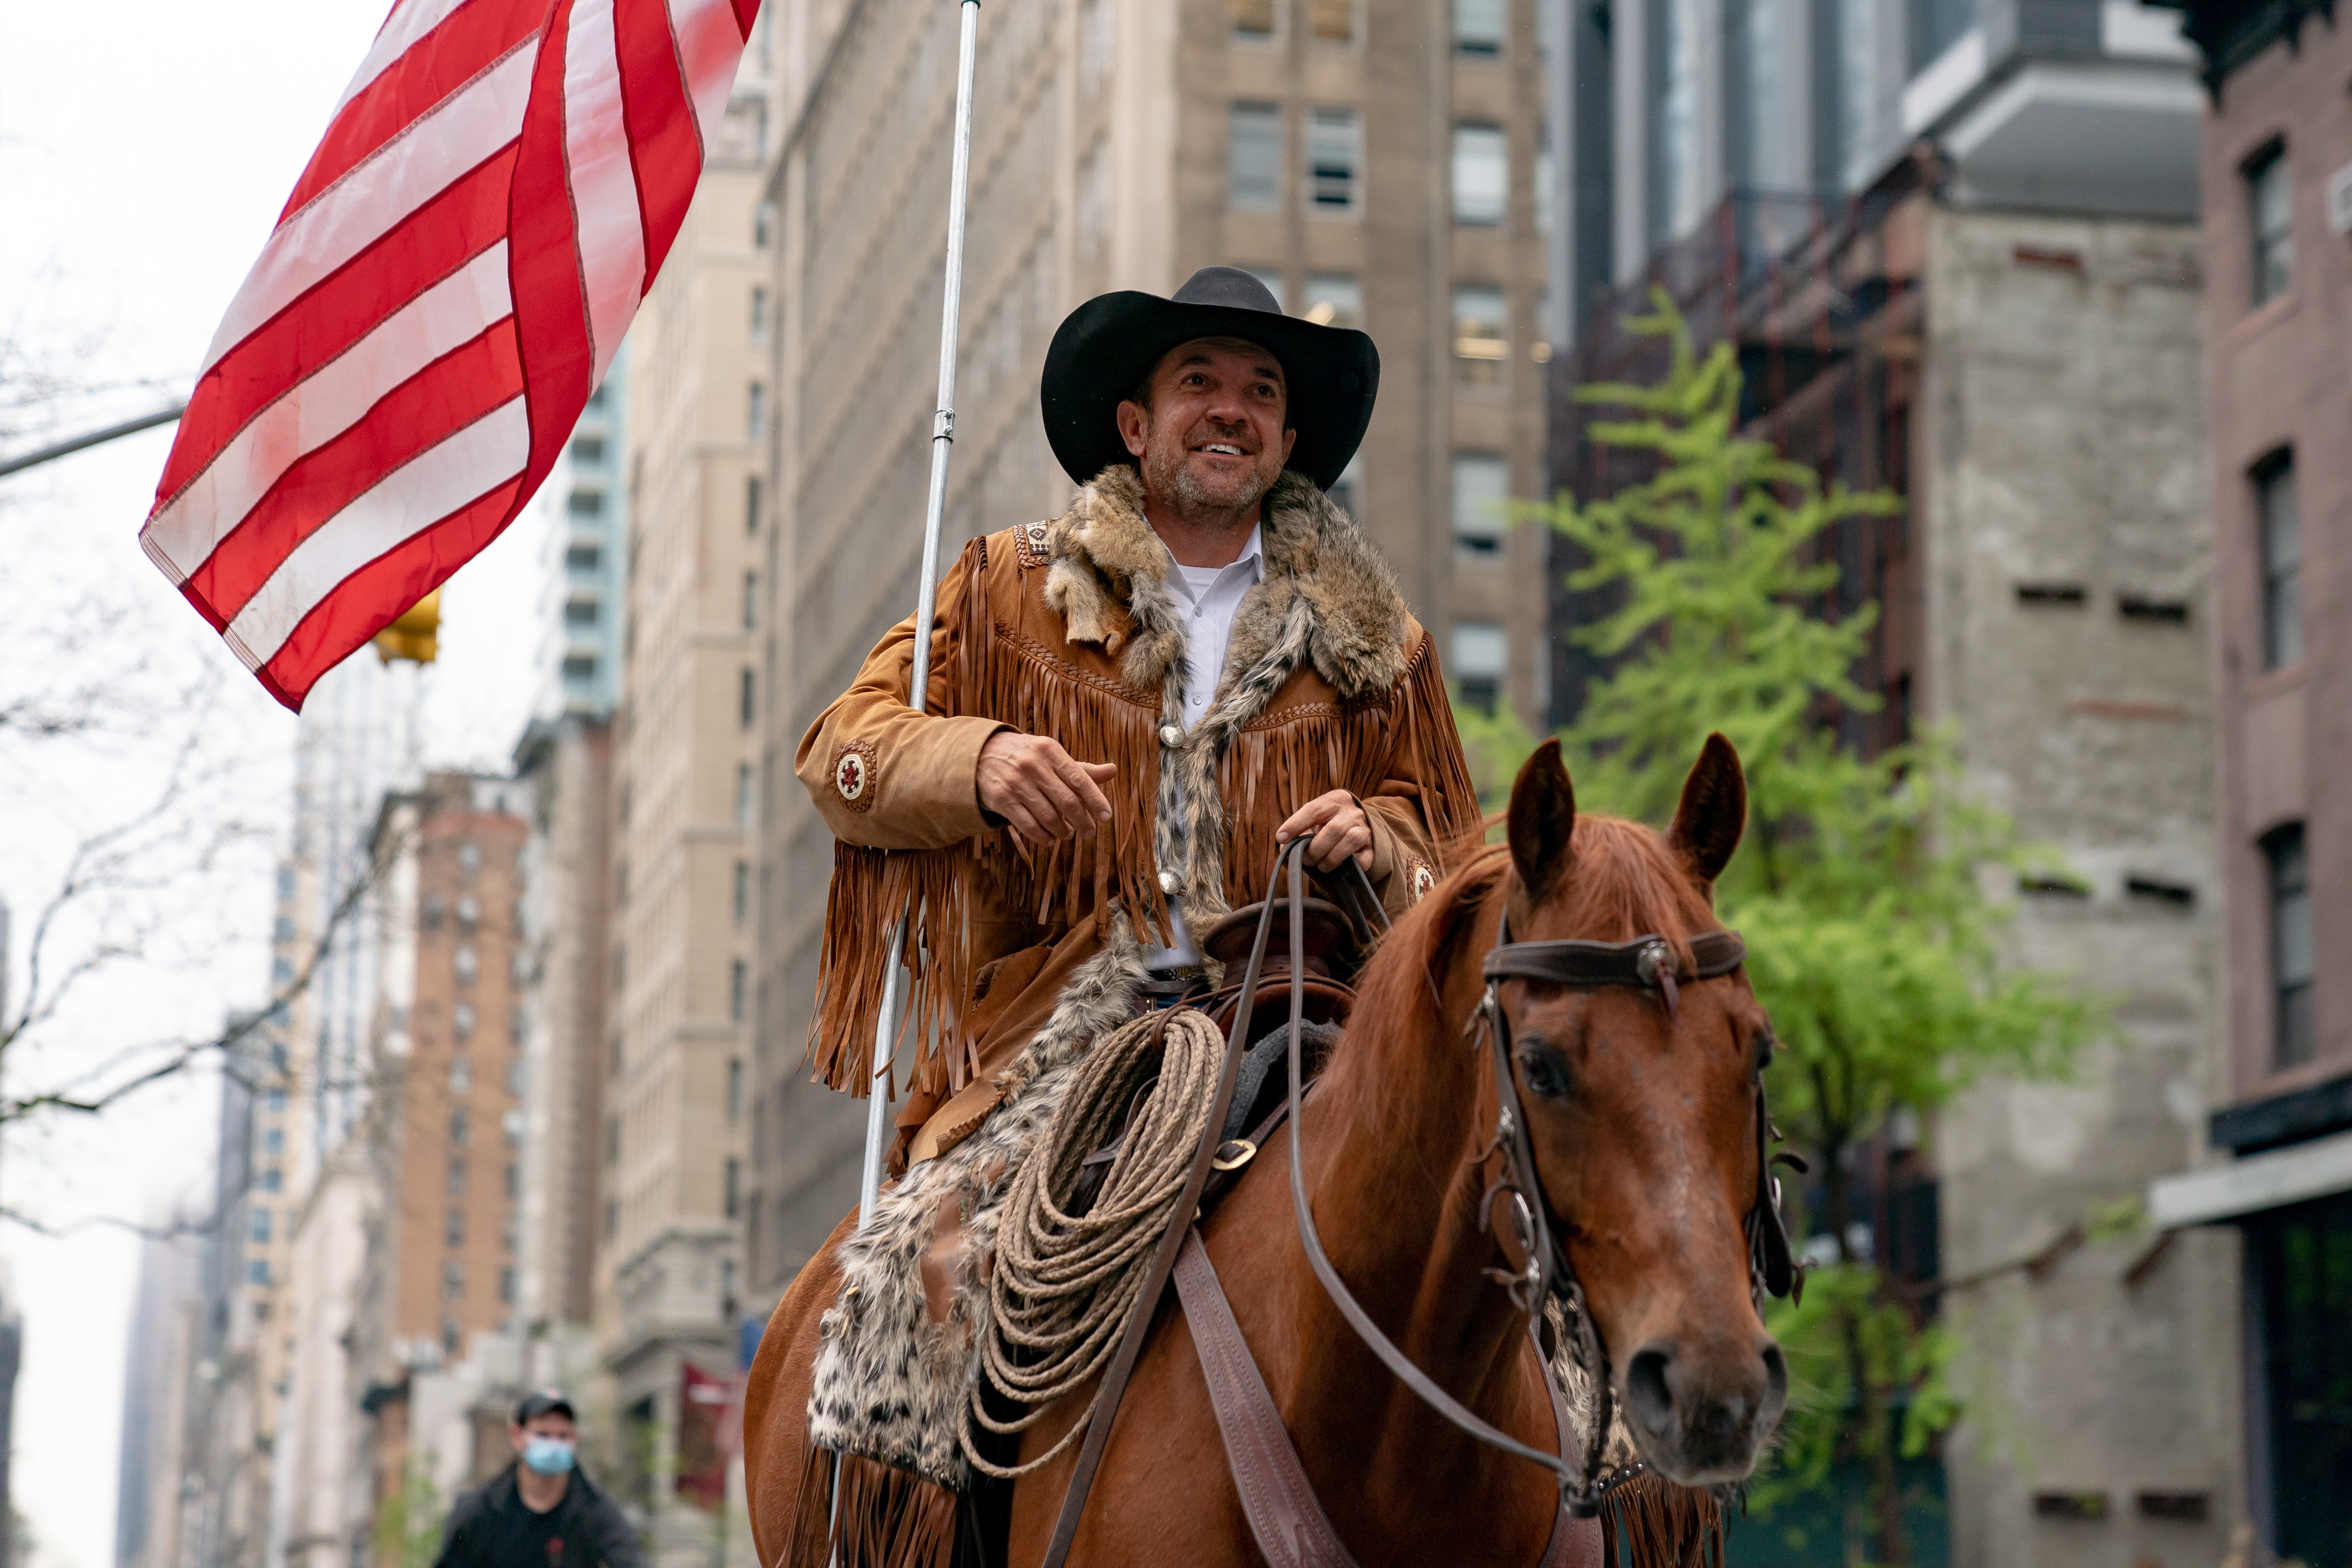 Now-former Otero County Commission chair and Cowboys for Trump co-founder Couy Griffin rides his horse on Fifth Avenue in New York on 1 May, 2020